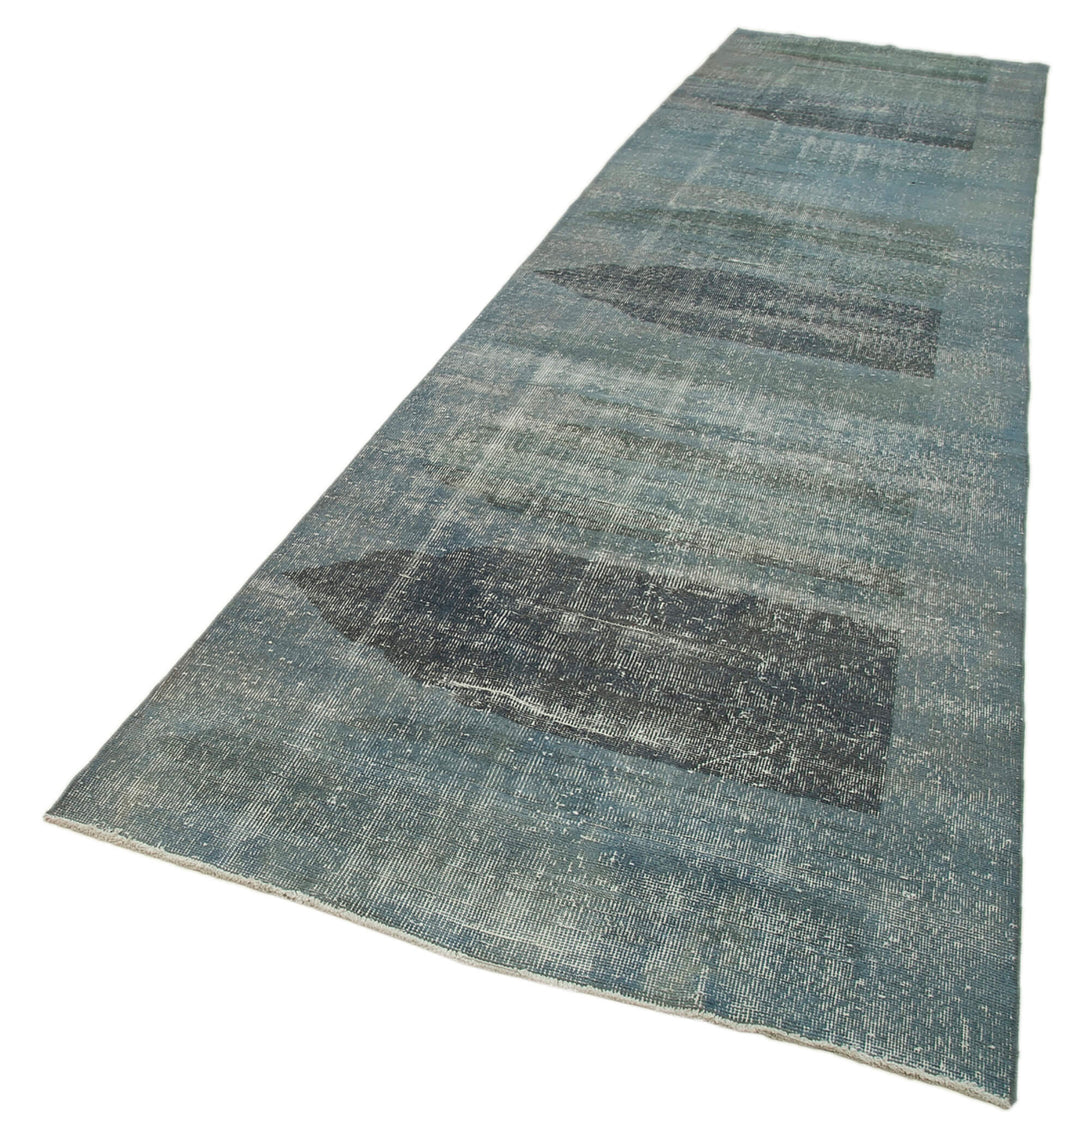 Handmade Overdyed Runner > Design# OL-AC-28671 > Size: 4'-0" x 16'-0", Carpet Culture Rugs, Handmade Rugs, NYC Rugs, New Rugs, Shop Rugs, Rug Store, Outlet Rugs, SoHo Rugs, Rugs in USA